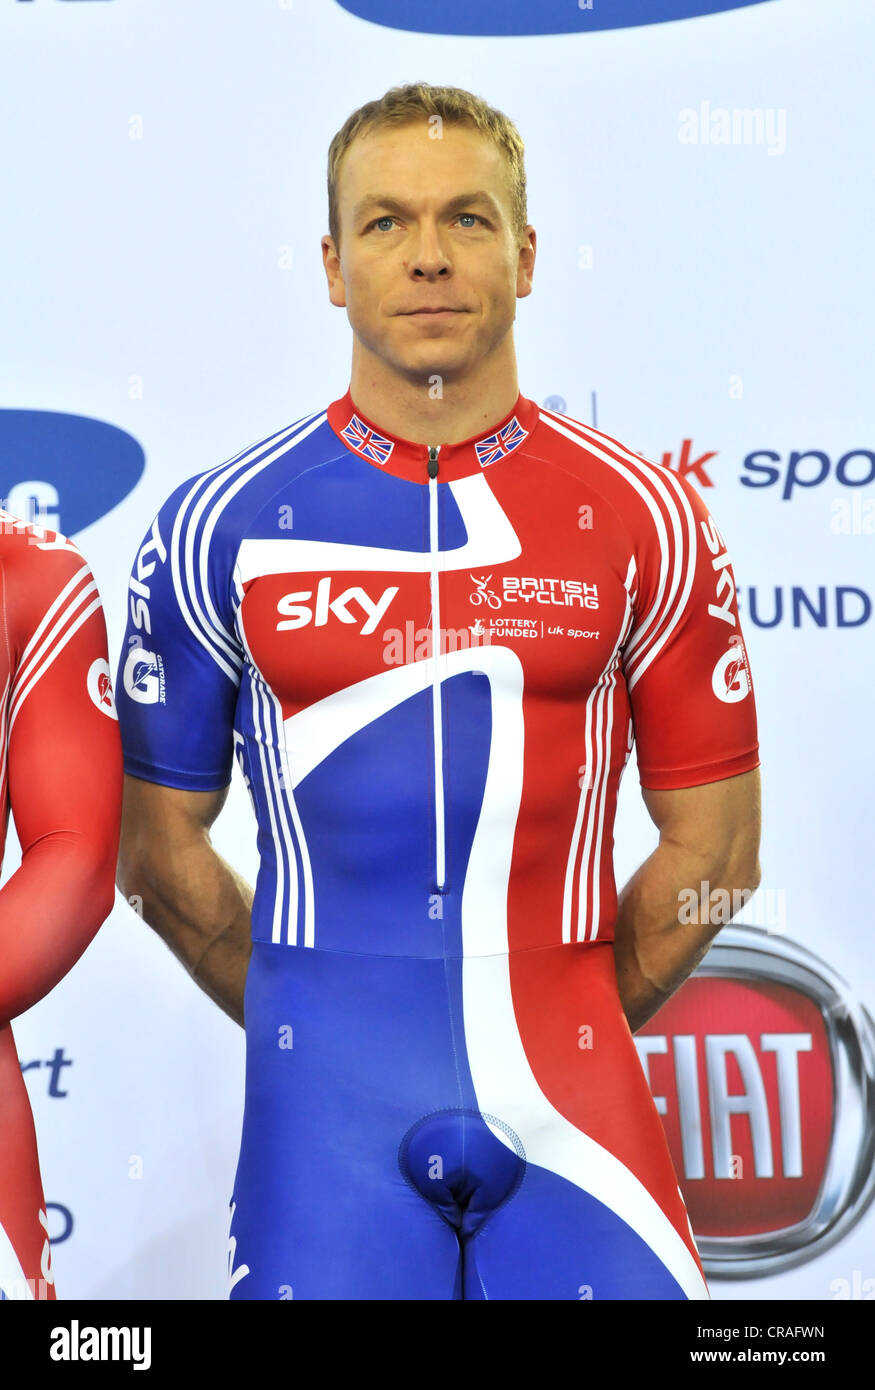 Sir Chris Hoy MBE at the UCI Track Cycling World Cup, London 2012 Velodrome. LOCOG Test-Event. Stock Photo